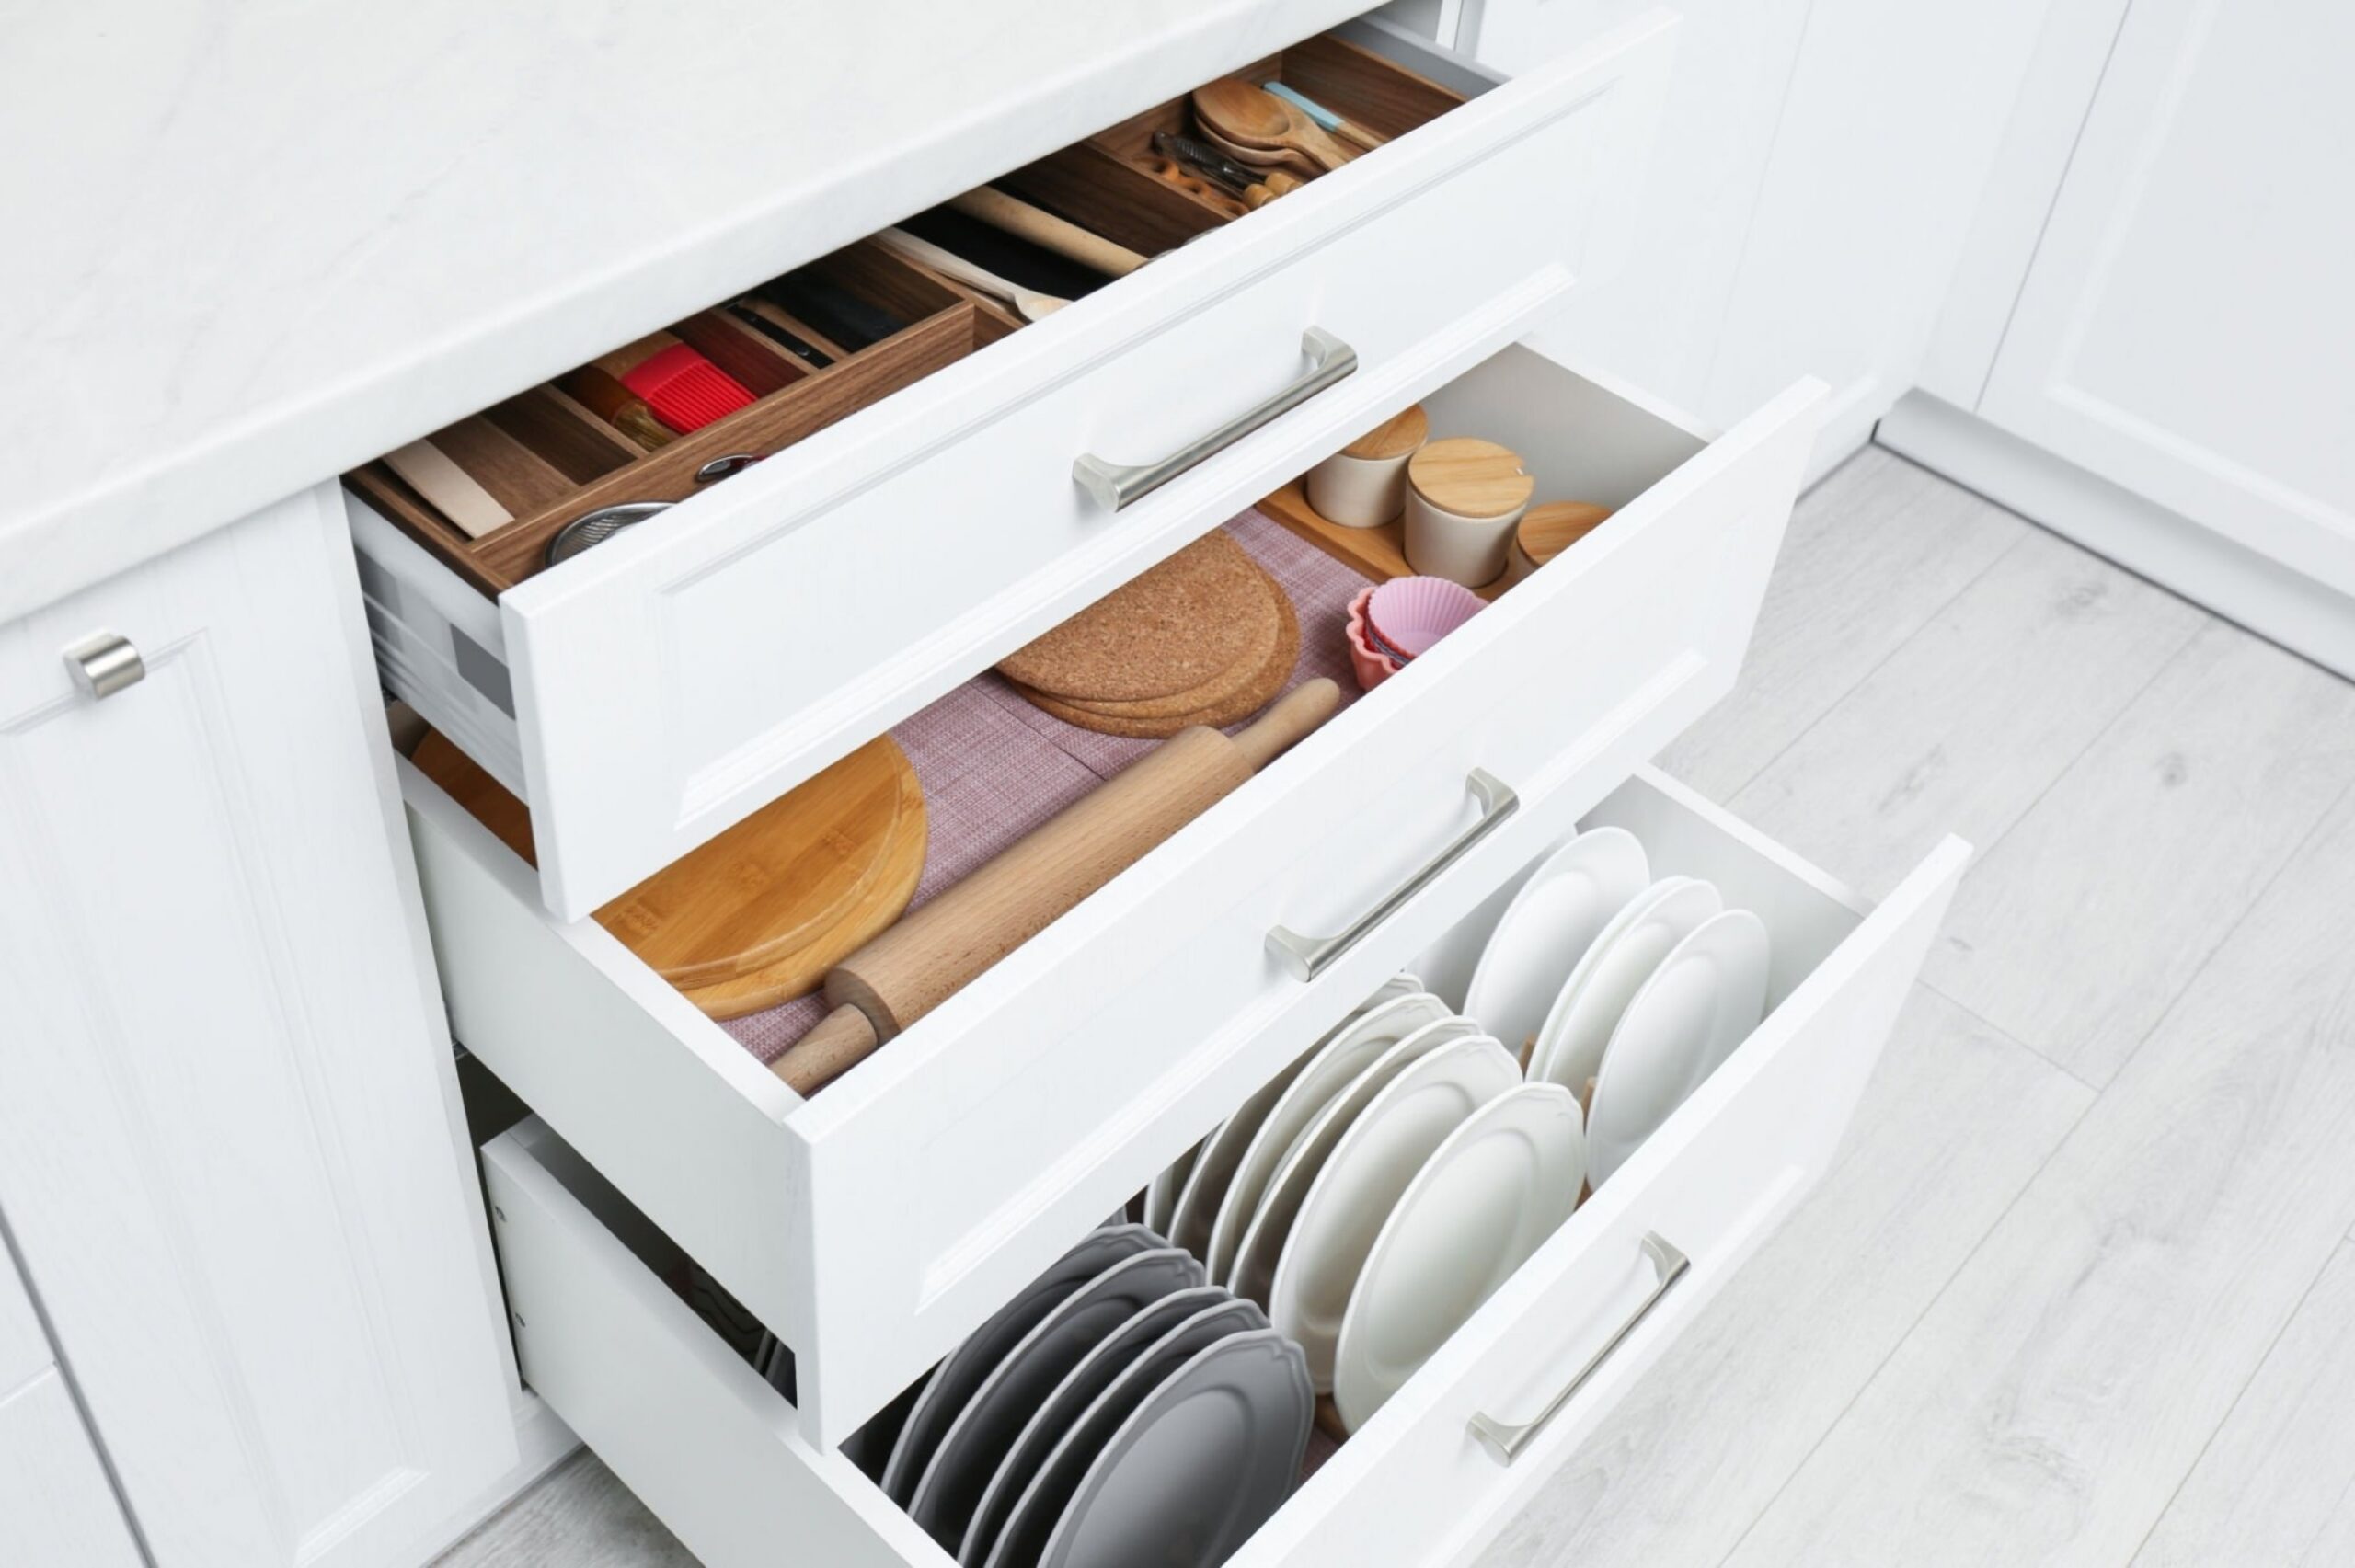 Open drawers with cutlery and utensils